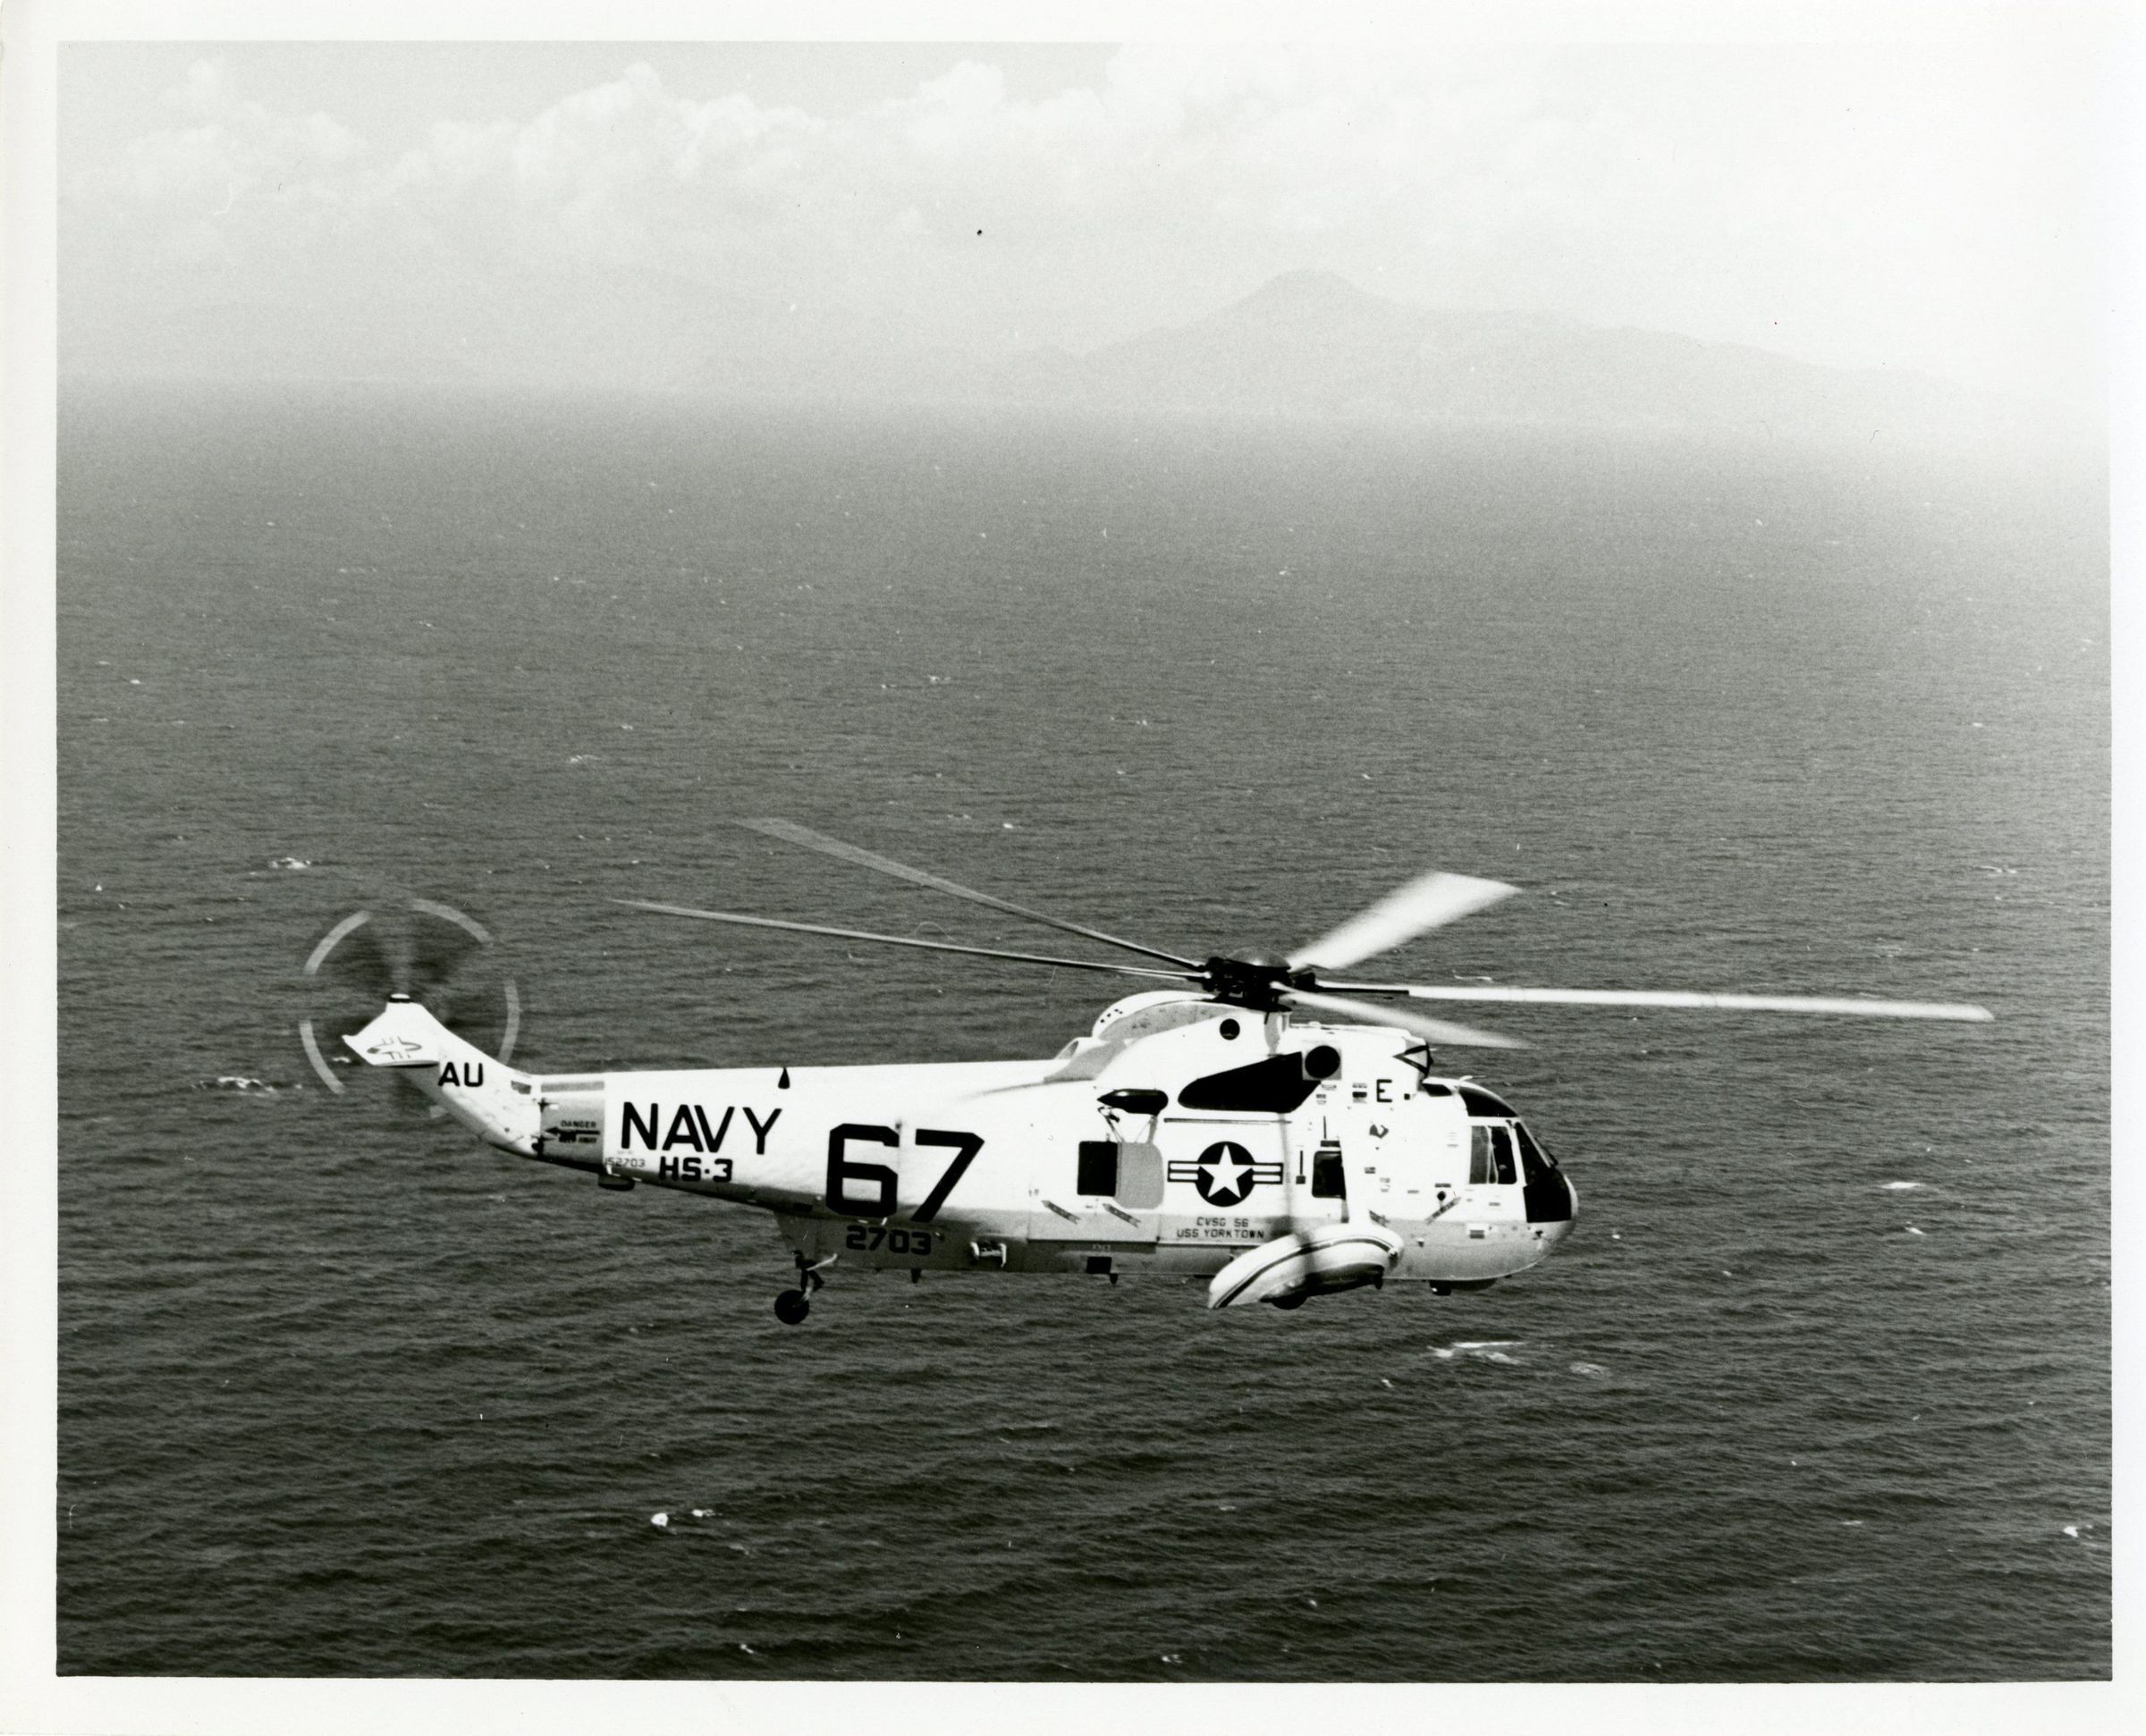 Primary Image of SH-3 Sea King Helicopter in Flight